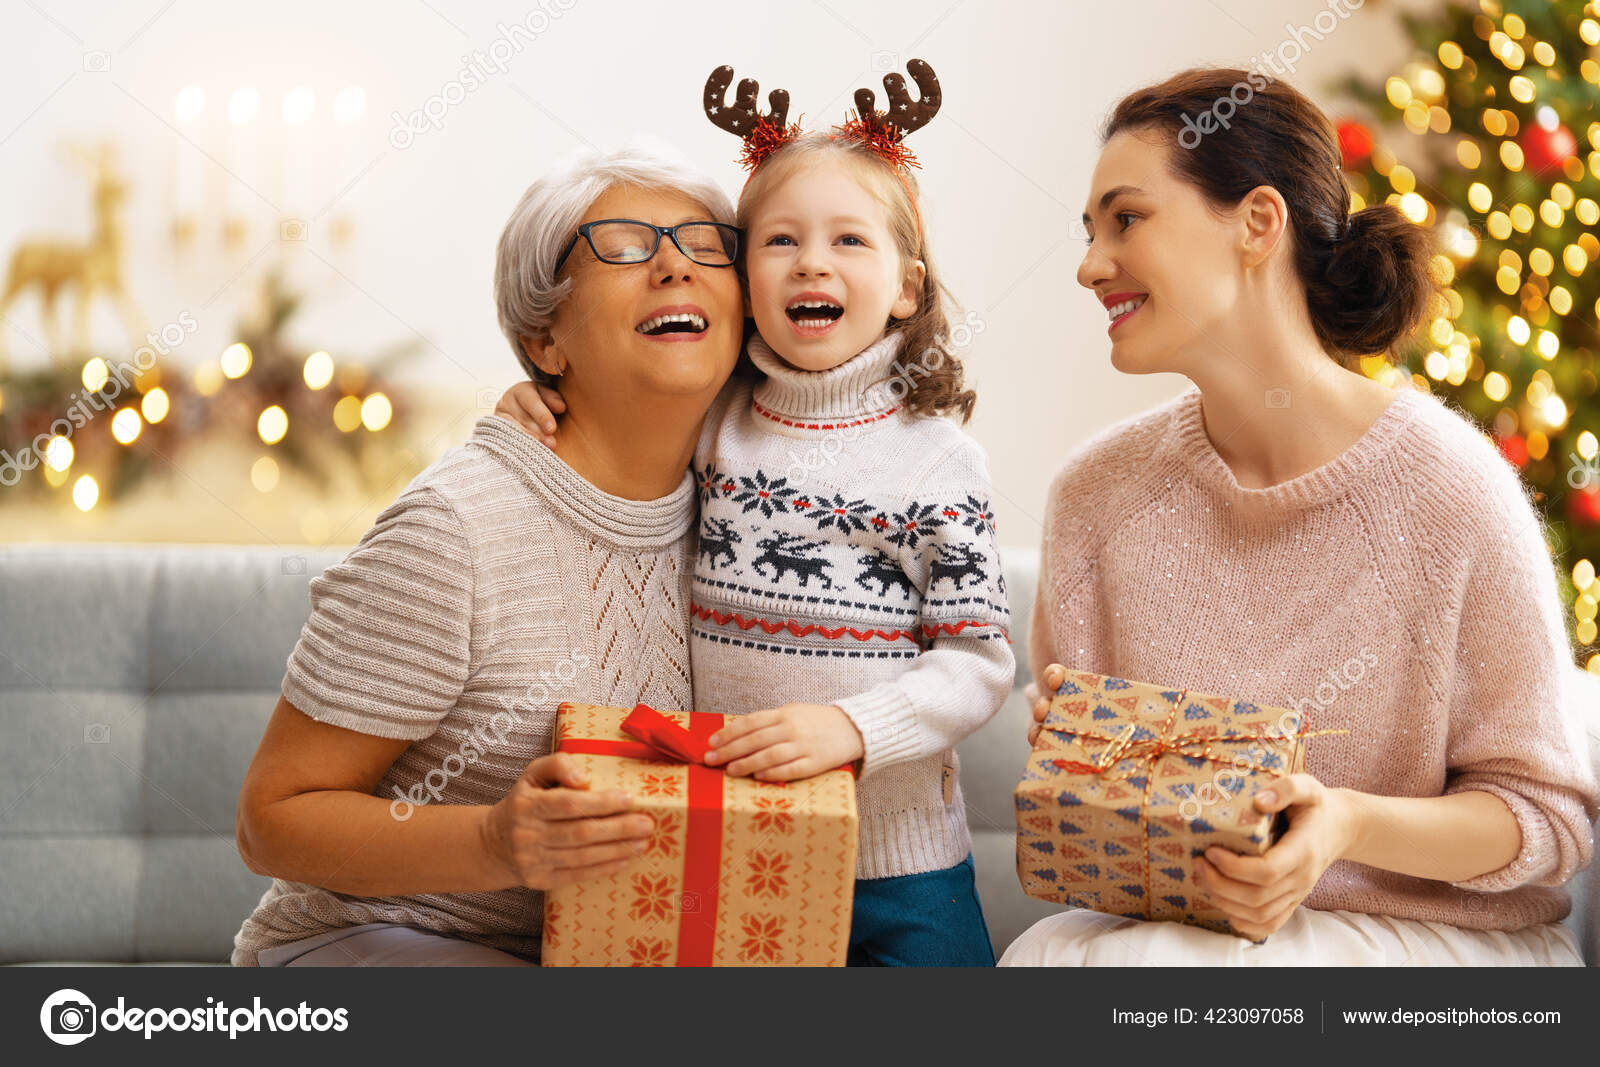 Merry Christmas Happy Holidays Cheerful Kids Presenting Gifts Mom Granny  Stock Photo by ©choreograph 523580328